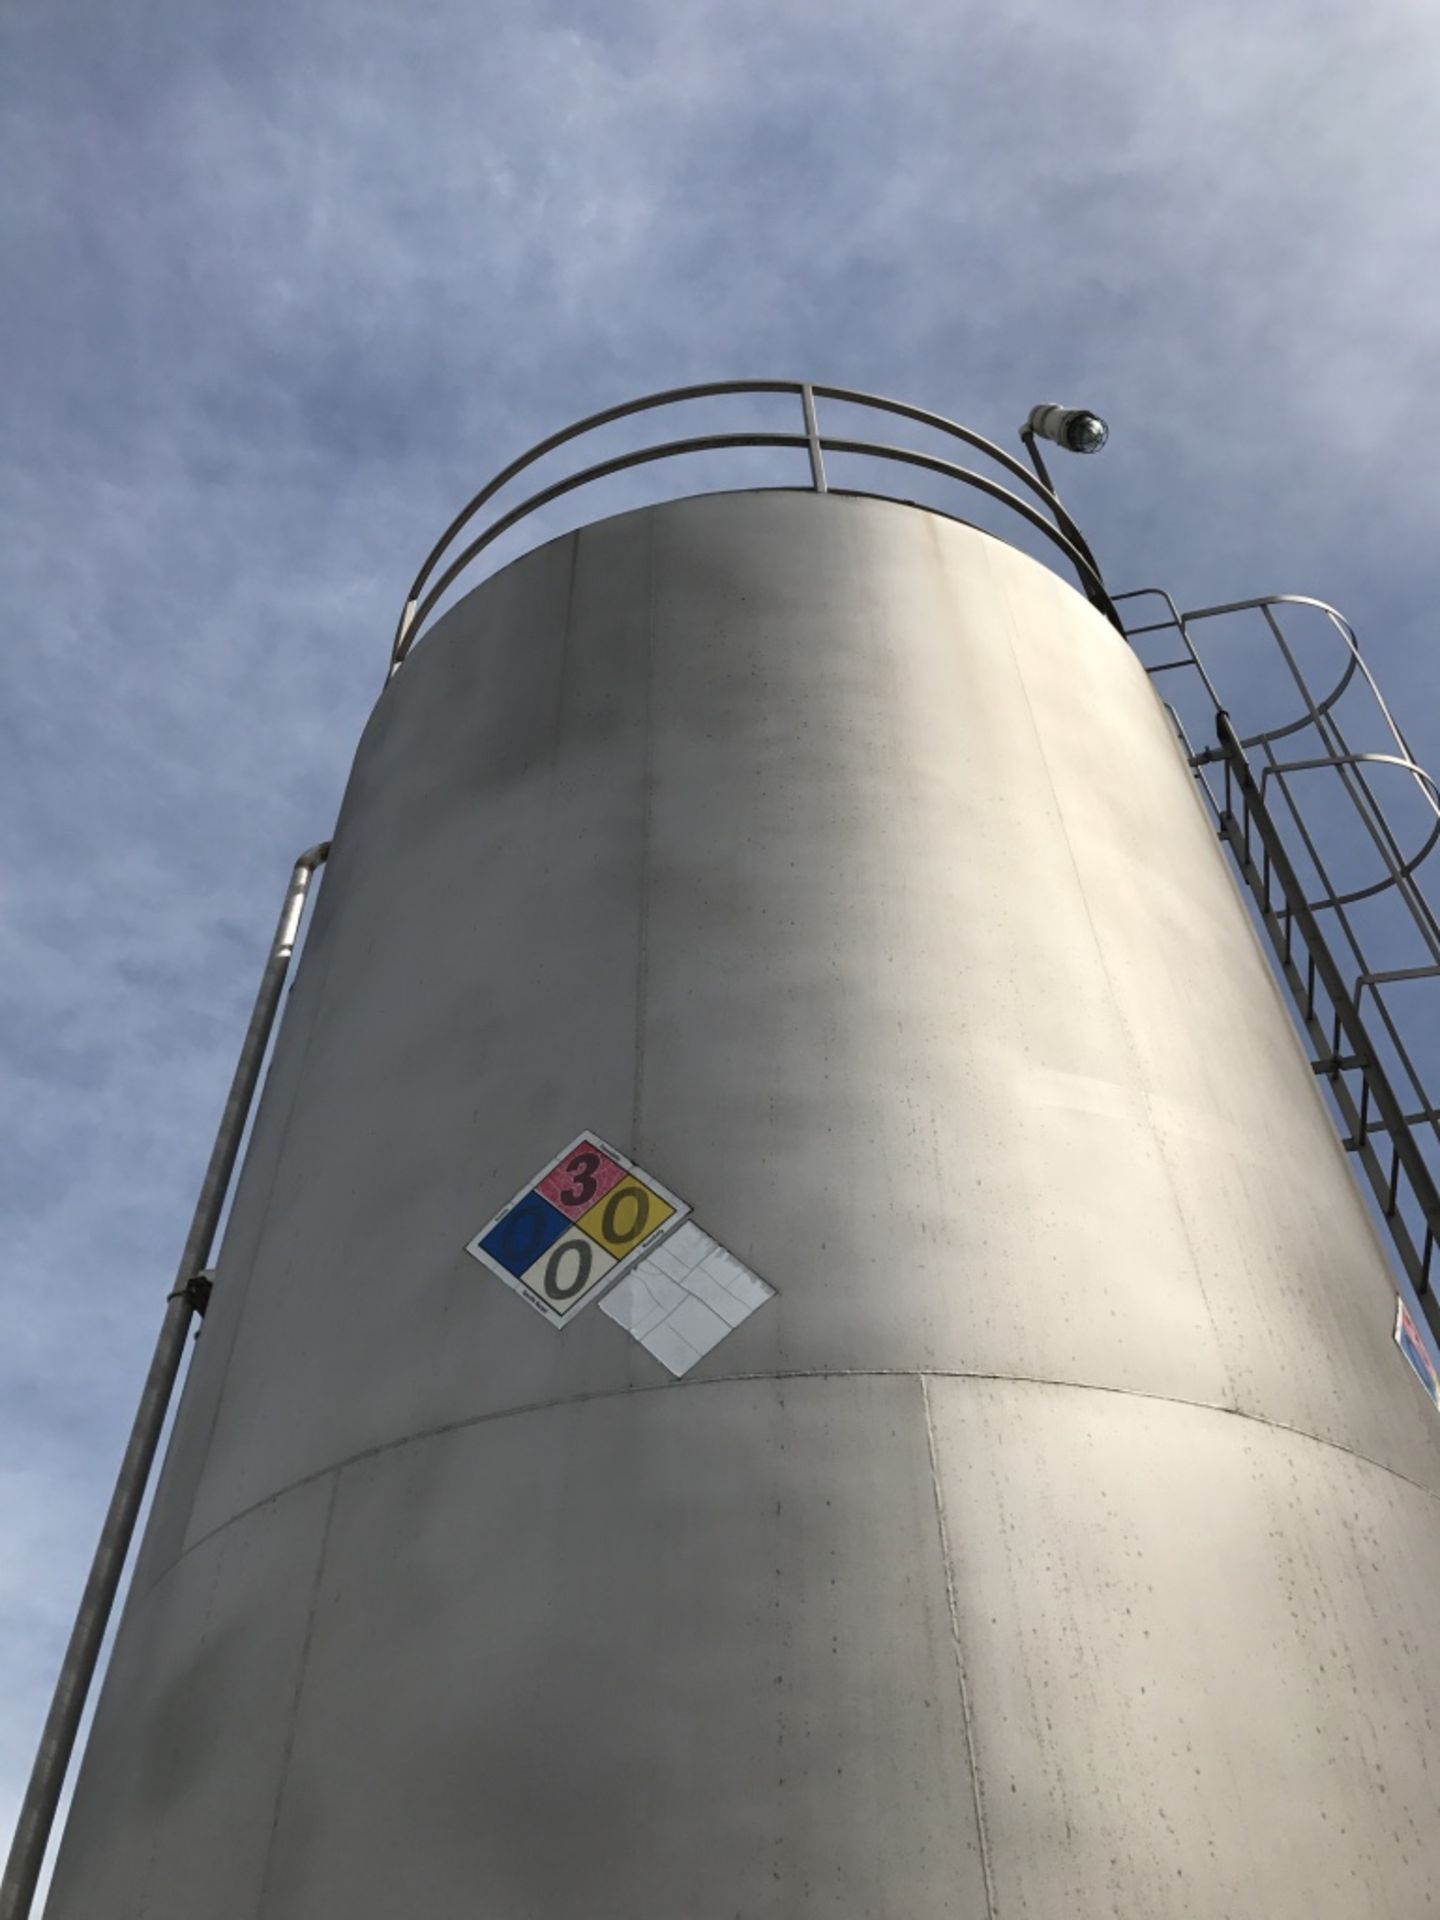 Stainless Alcohol Storage Tank Approximate 20,000 Gallons - Image 3 of 5